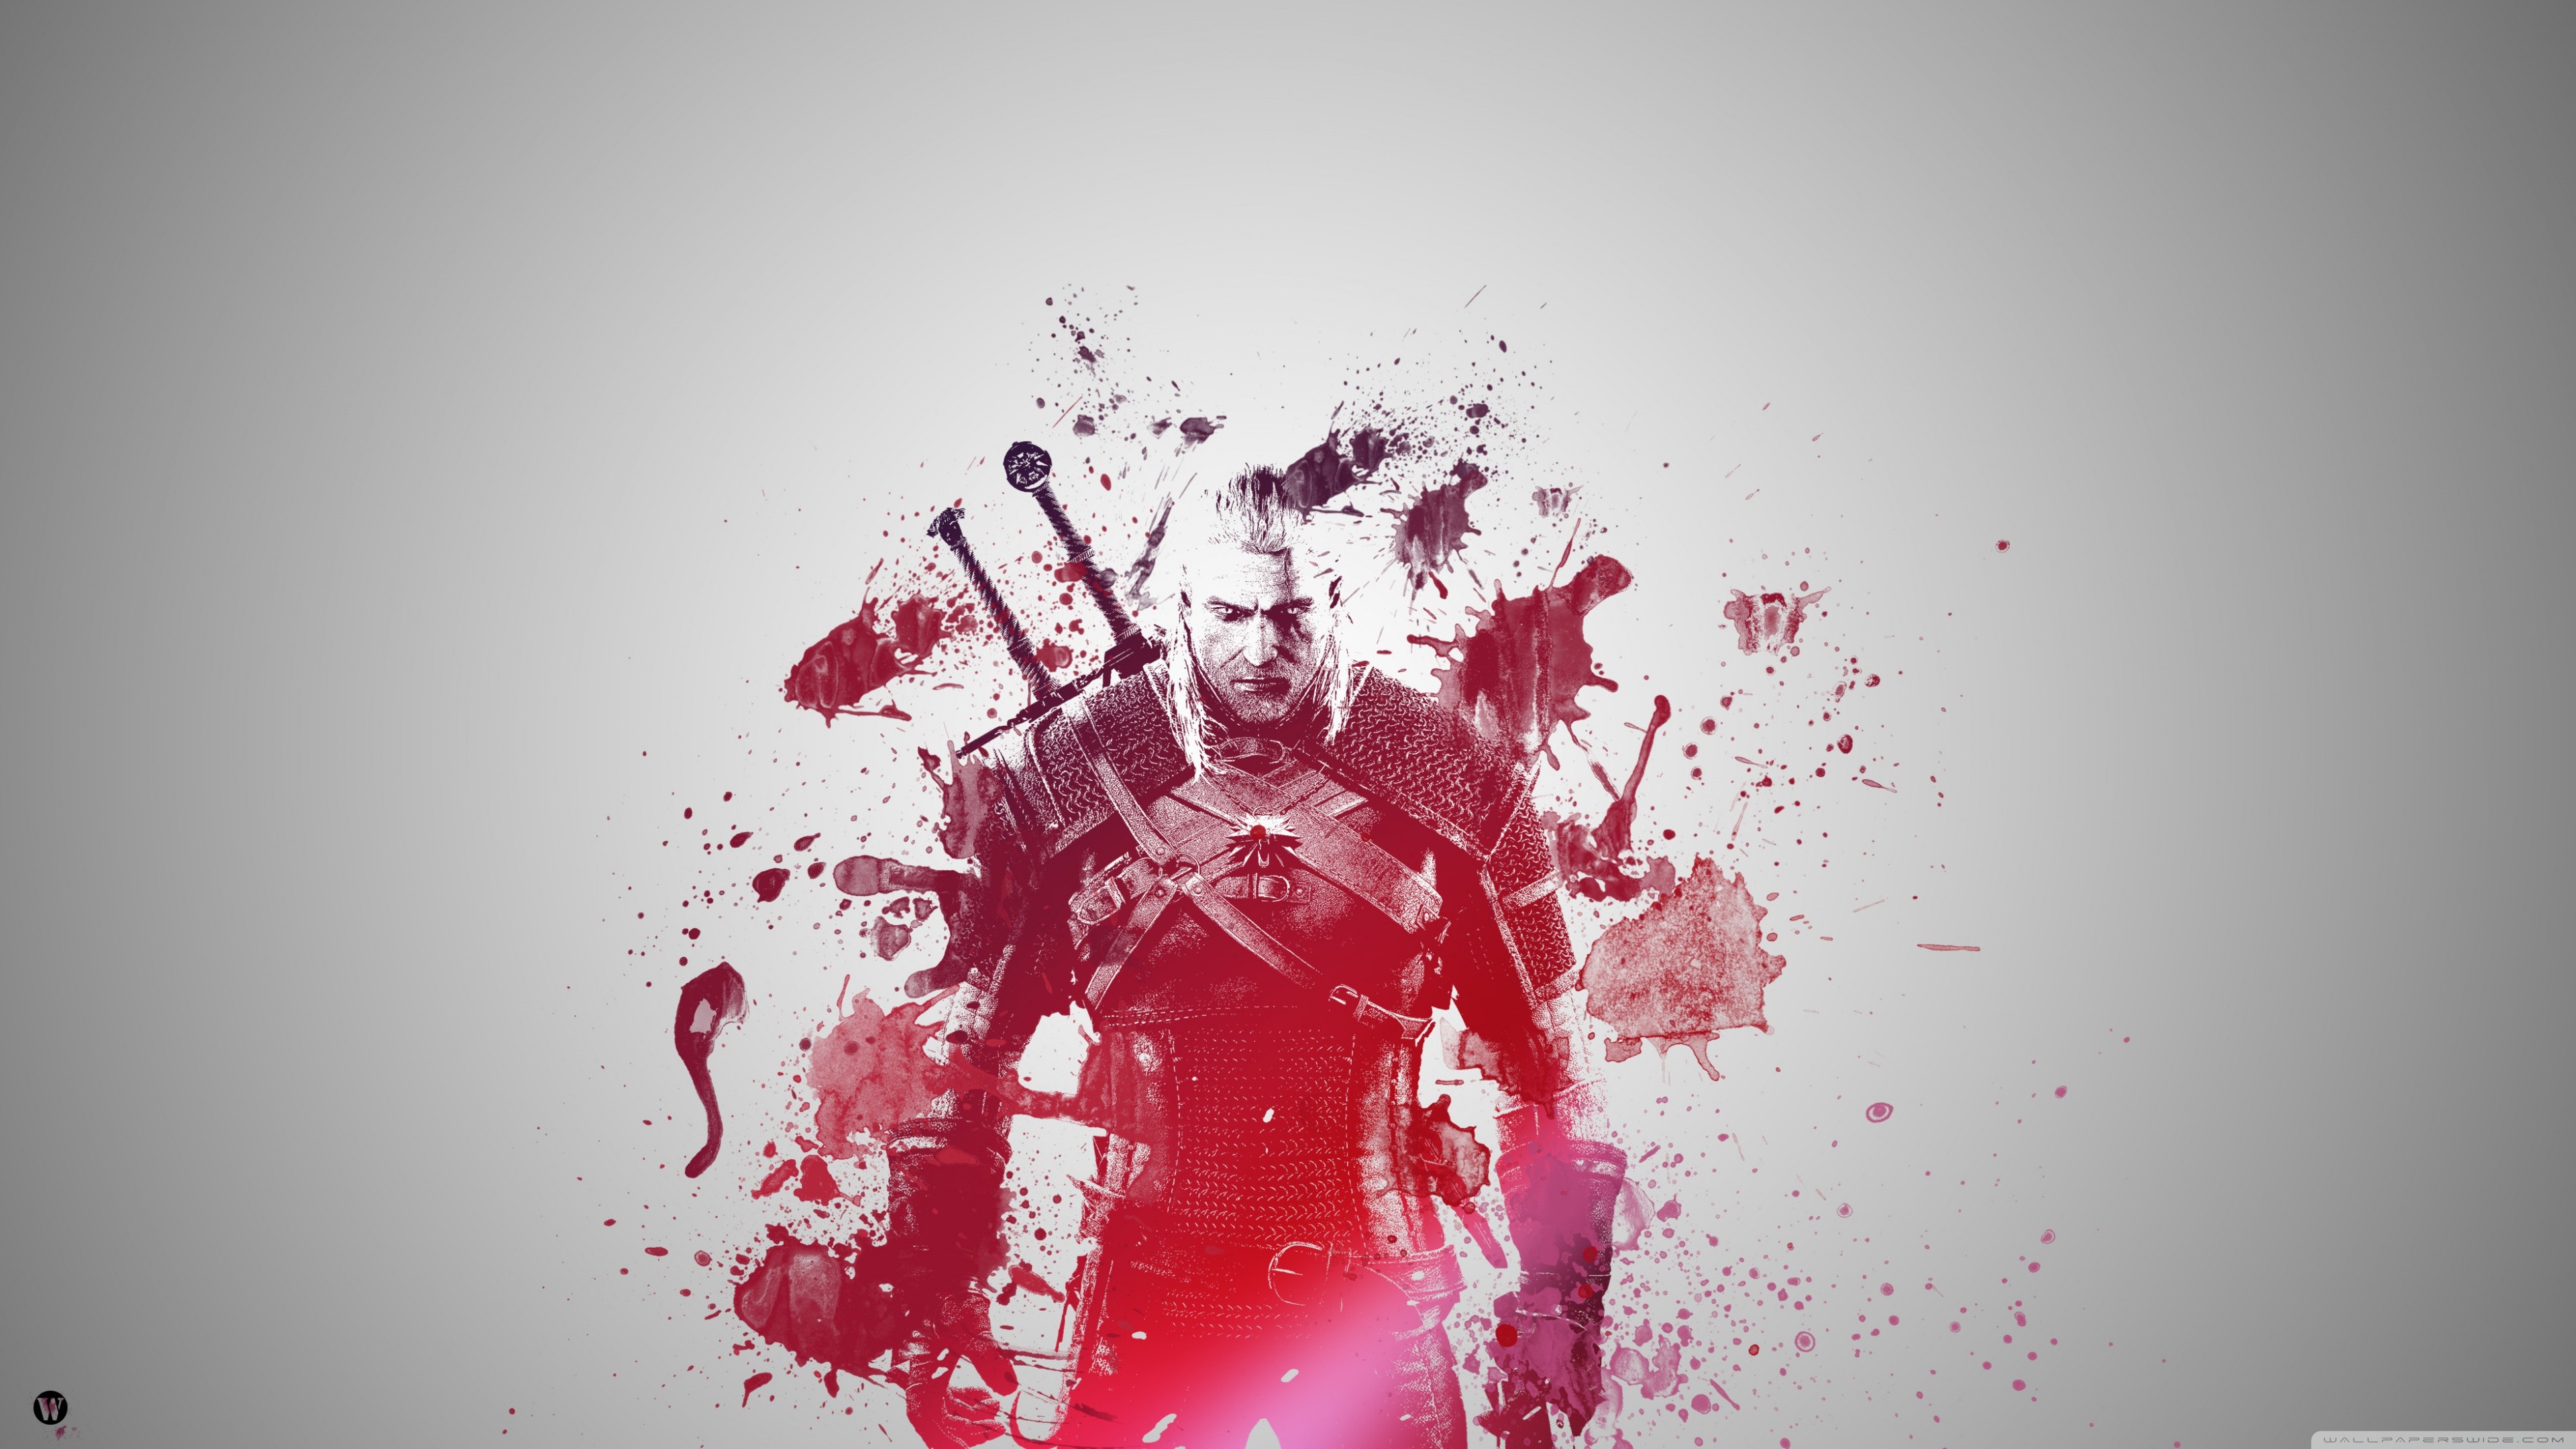 3840x2160 The Witcher 3 Wild Hunt Geralt of Rivia HD Wide Wallpaper for Widescreen